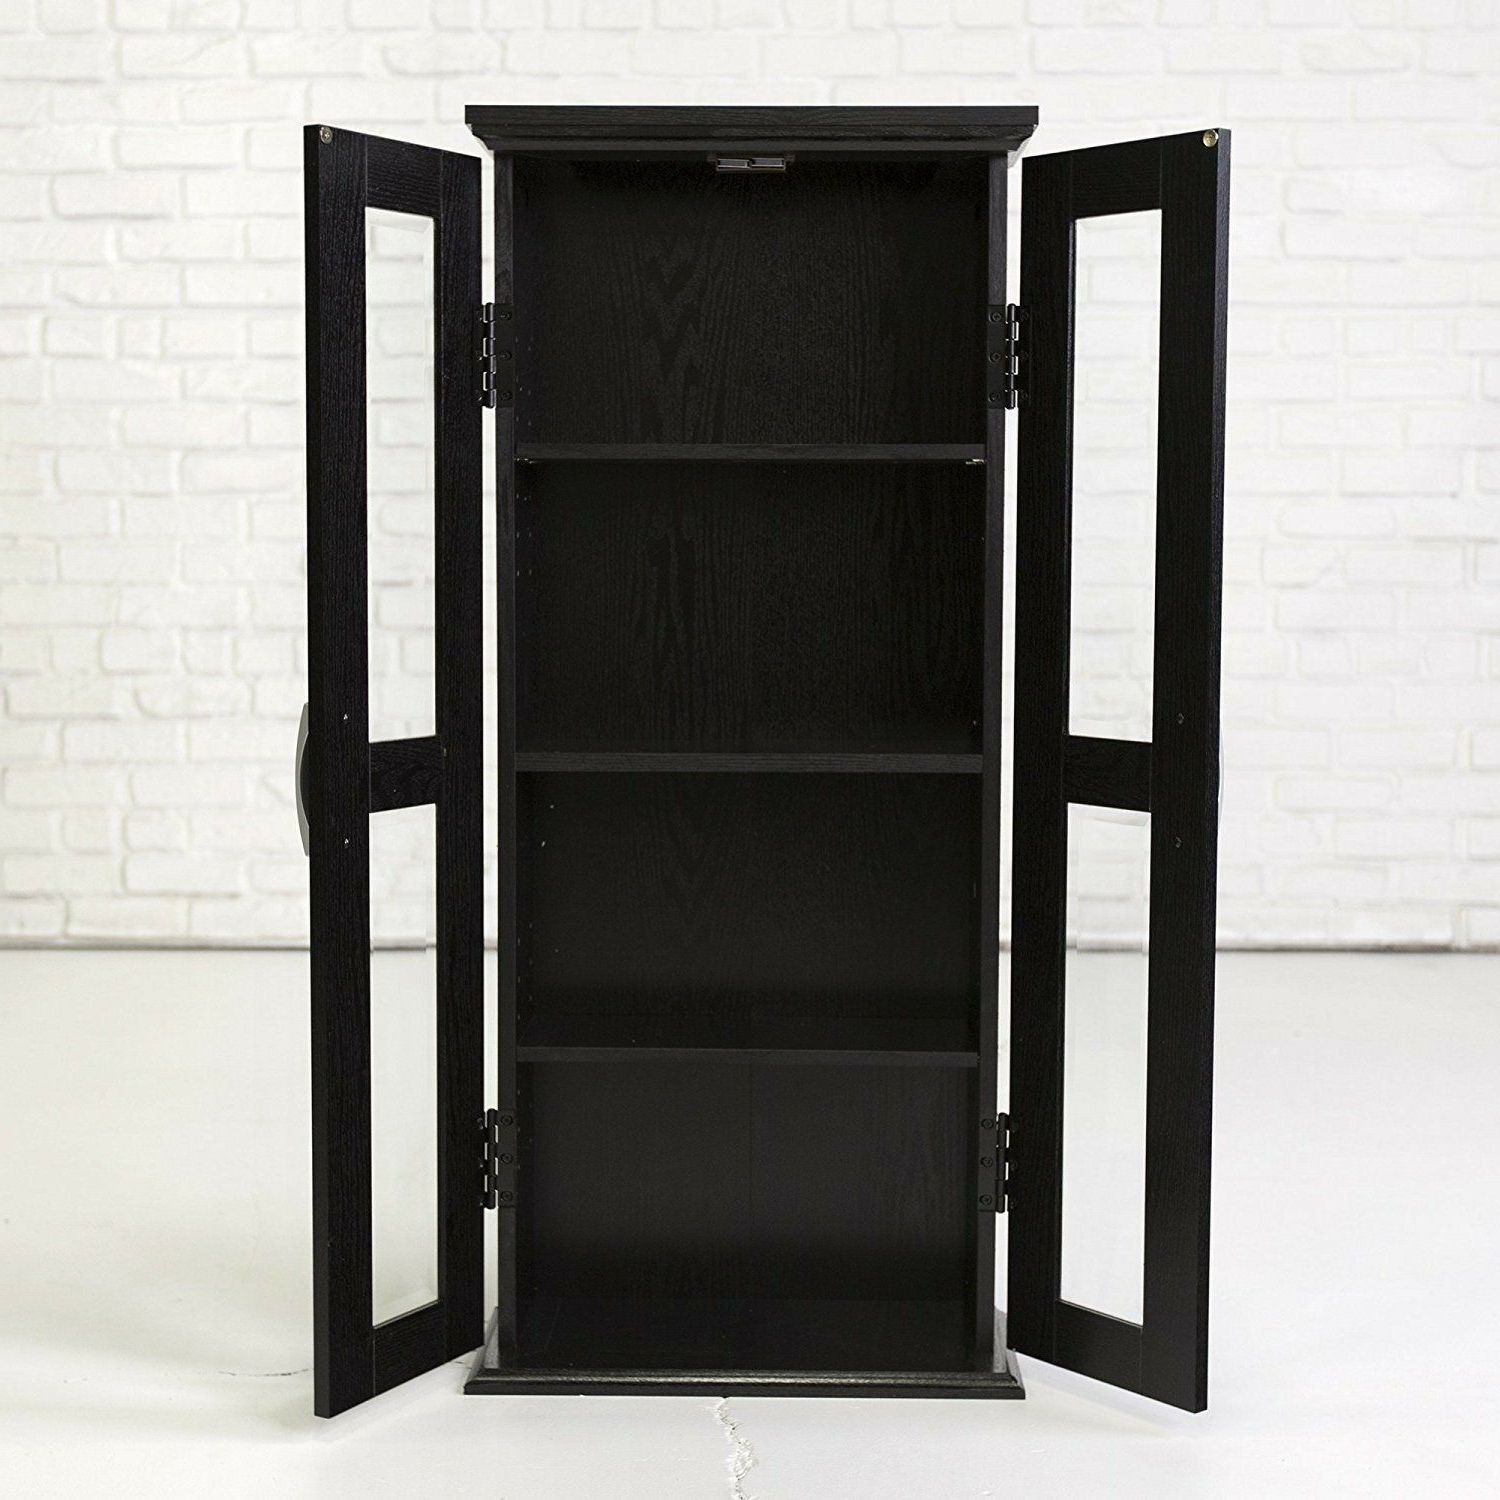 Modern Black Wood Media Storage Cabinet With Glass Doors Pertaining To Walker Edison Wood Tv Media Storage Stands In Black (View 9 of 20)